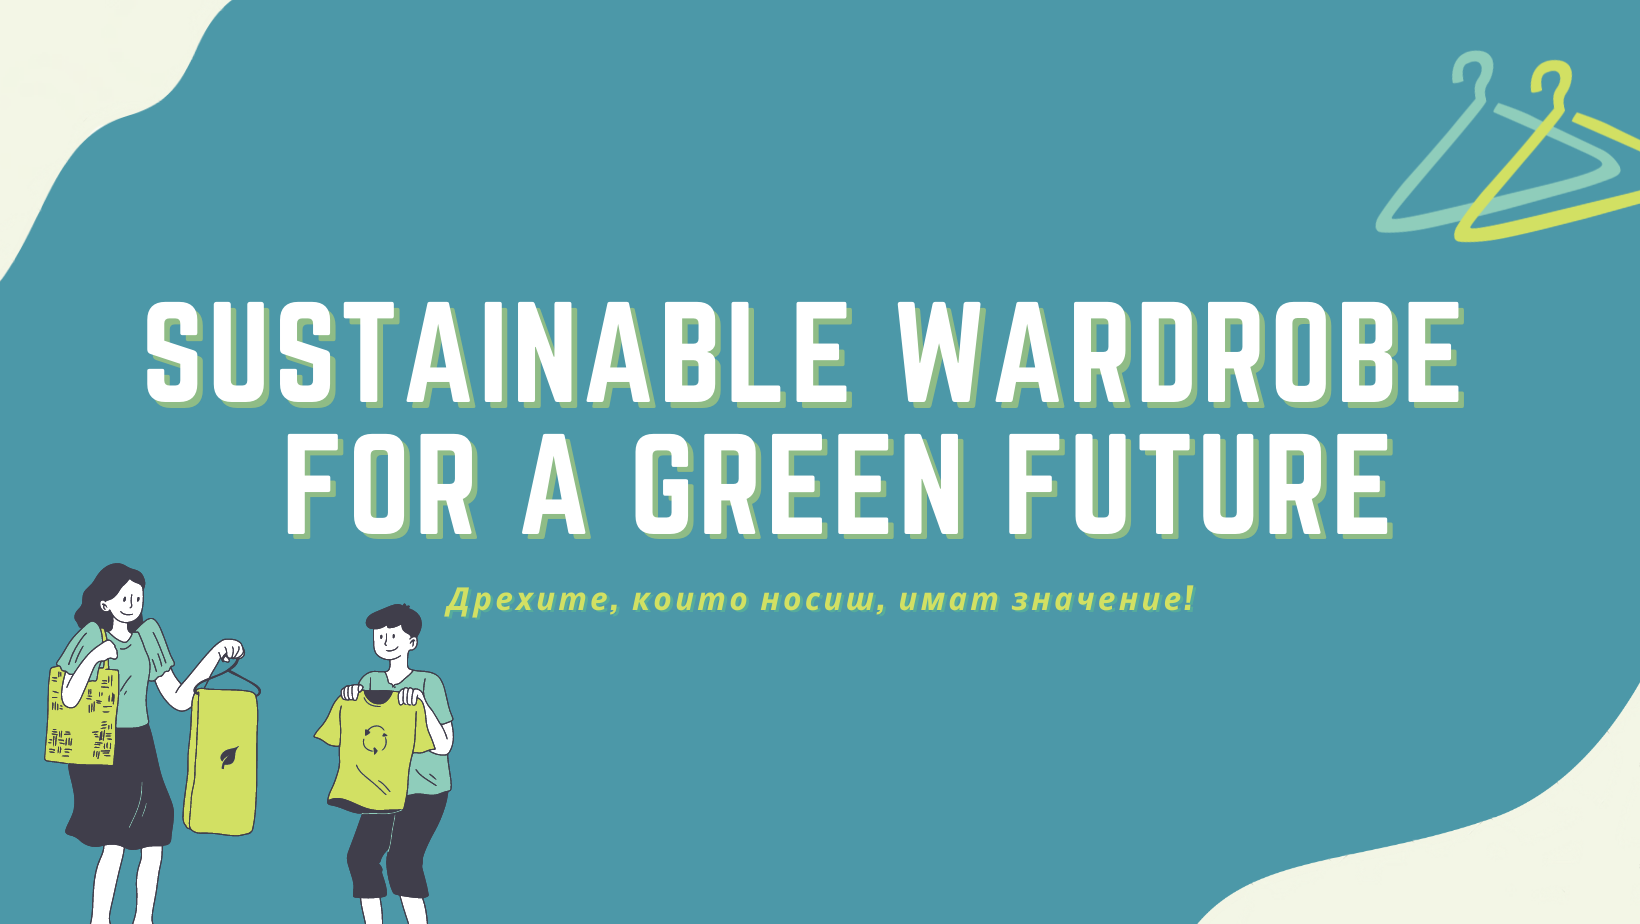 Sustainable Wardrobe for a Green Future with some animated young people